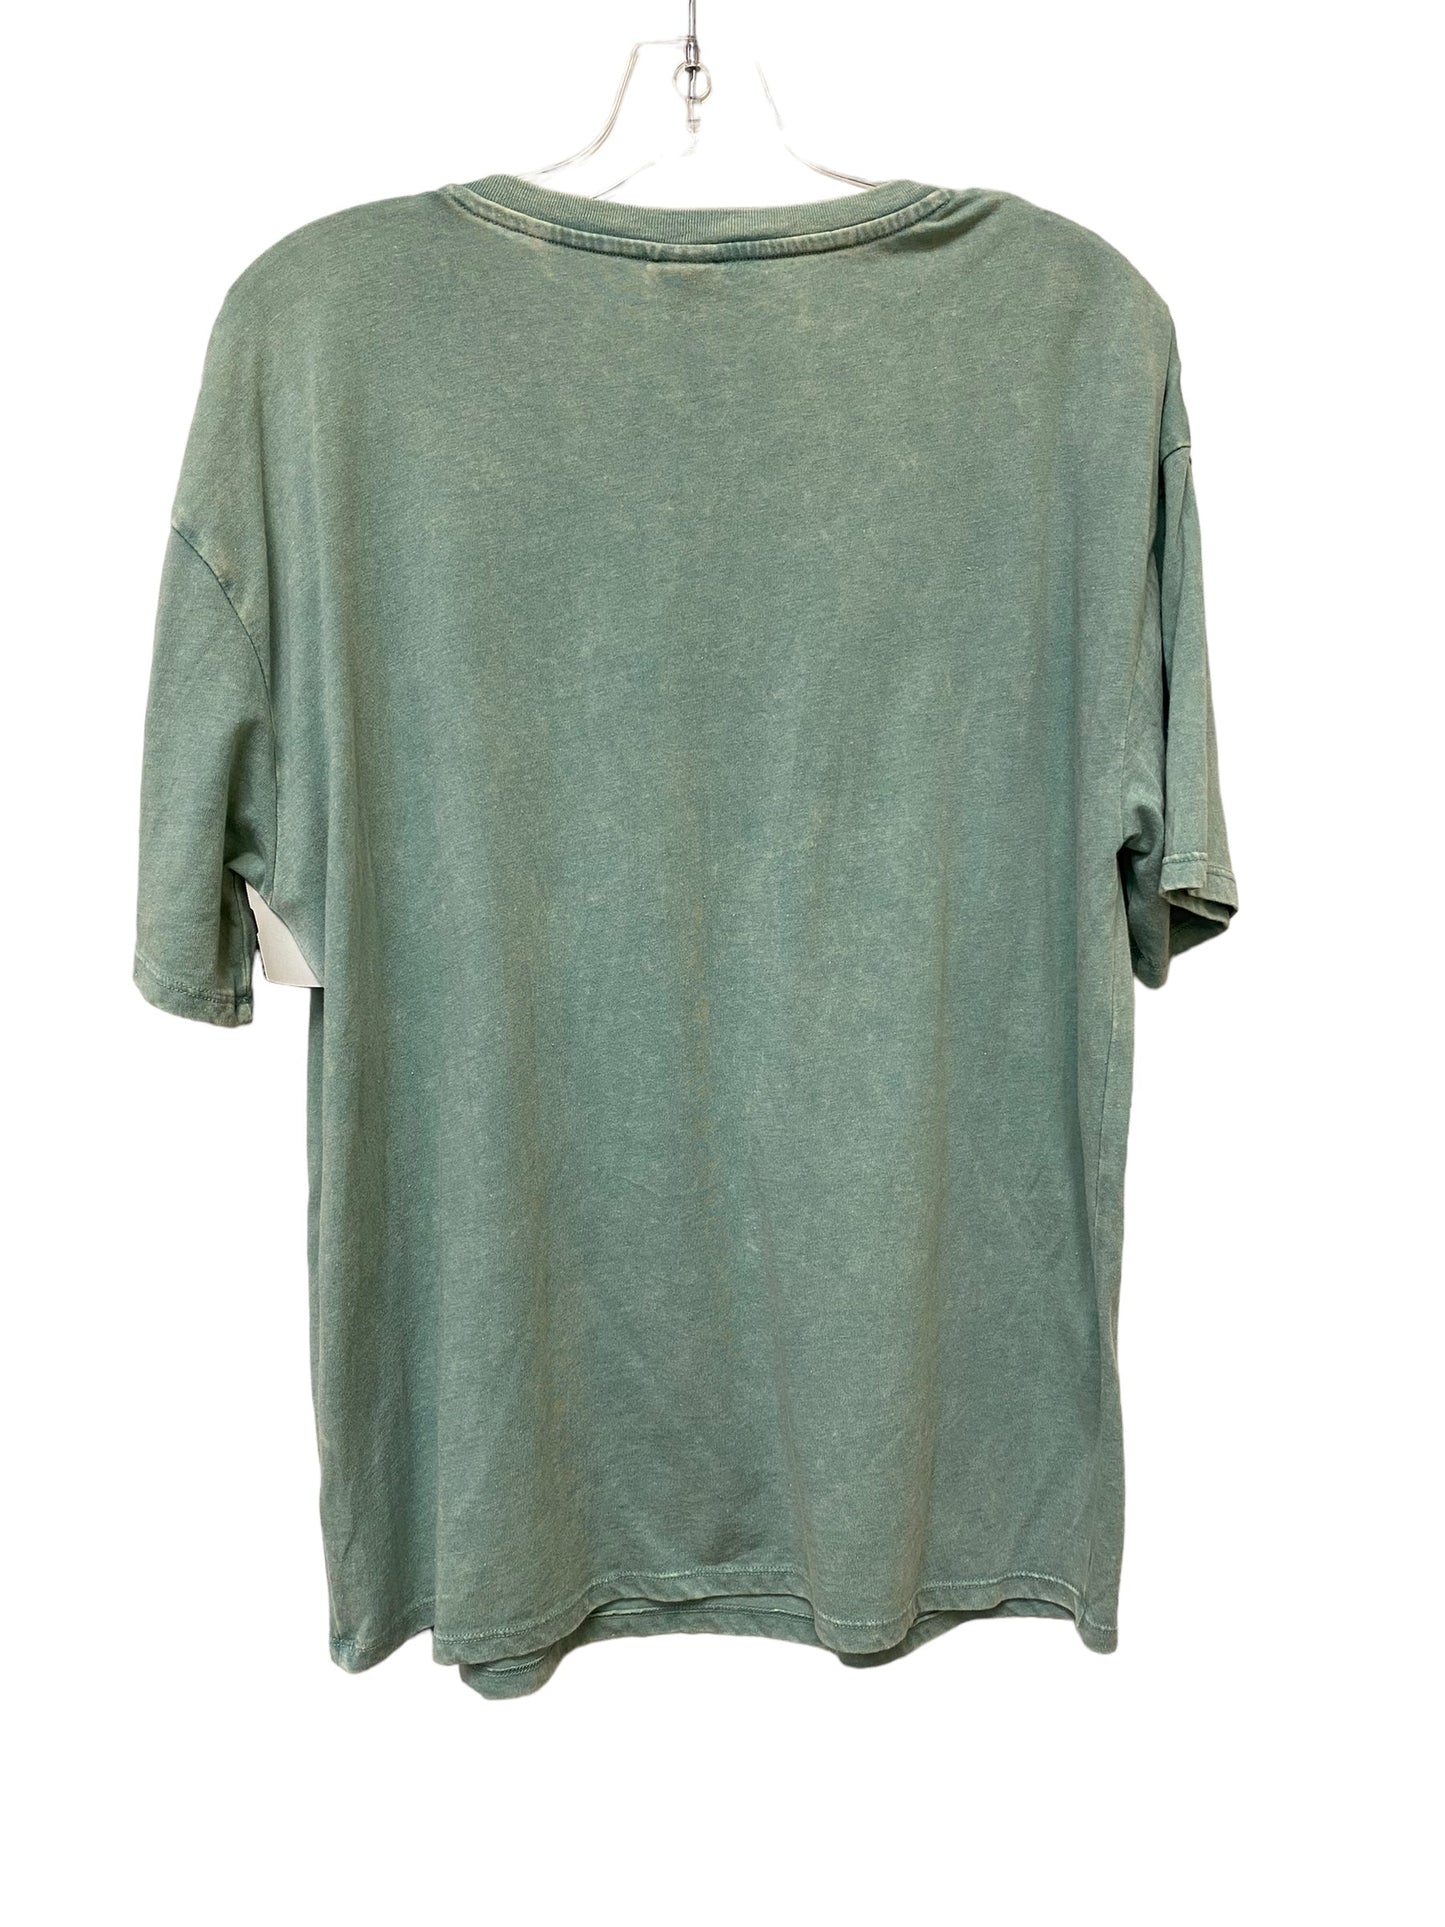 Teal Top Short Sleeve Wild Fable, Size Xxs